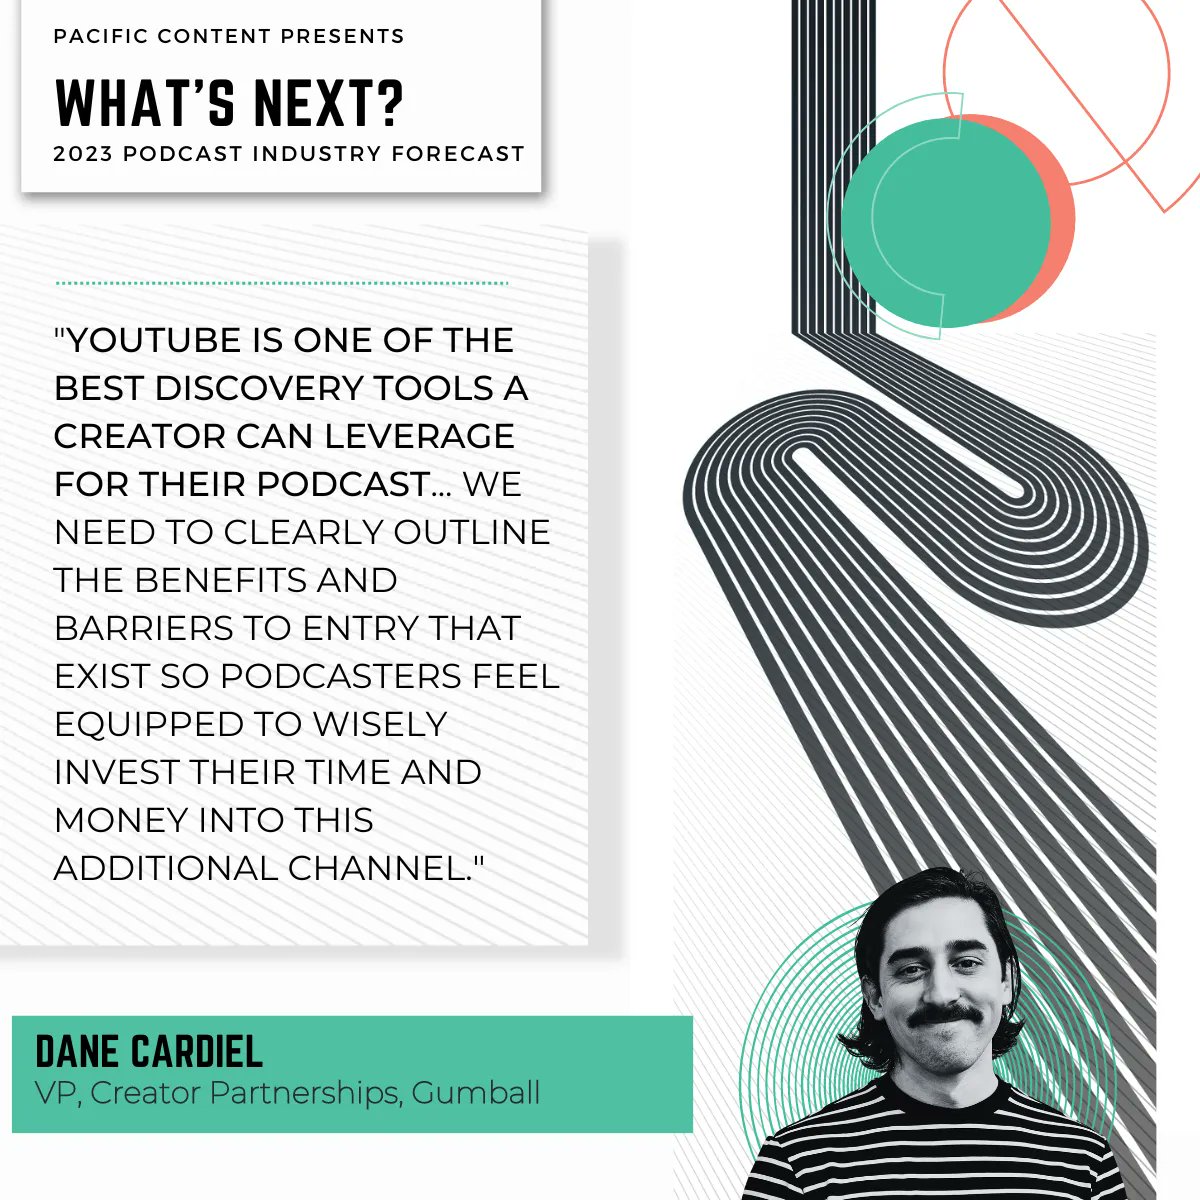 Our very own @danecardiel and Kaiti Moos were featured in the 2023 Podcast Industry Forecast by @pacificcontent where they gave their thoughts on the future of podcasting. #nextinpodcasting2023

 Check out the blog post here: bit.ly/3GkhC3Y